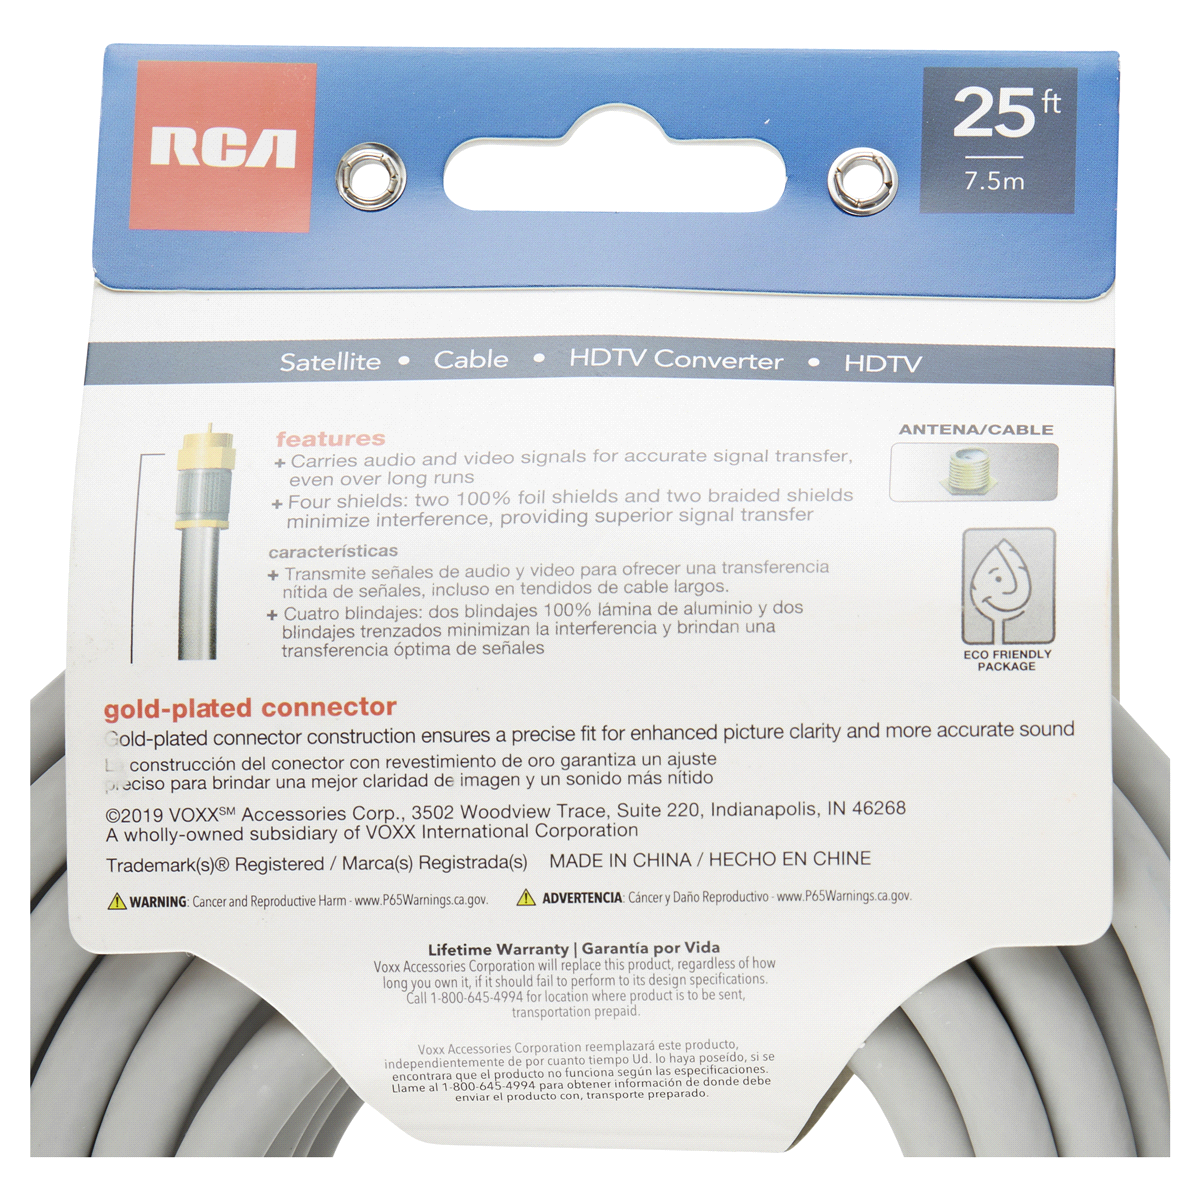 slide 5 of 5, RCA 25FT RG6 Digital Coaxial Cable, 1 ct